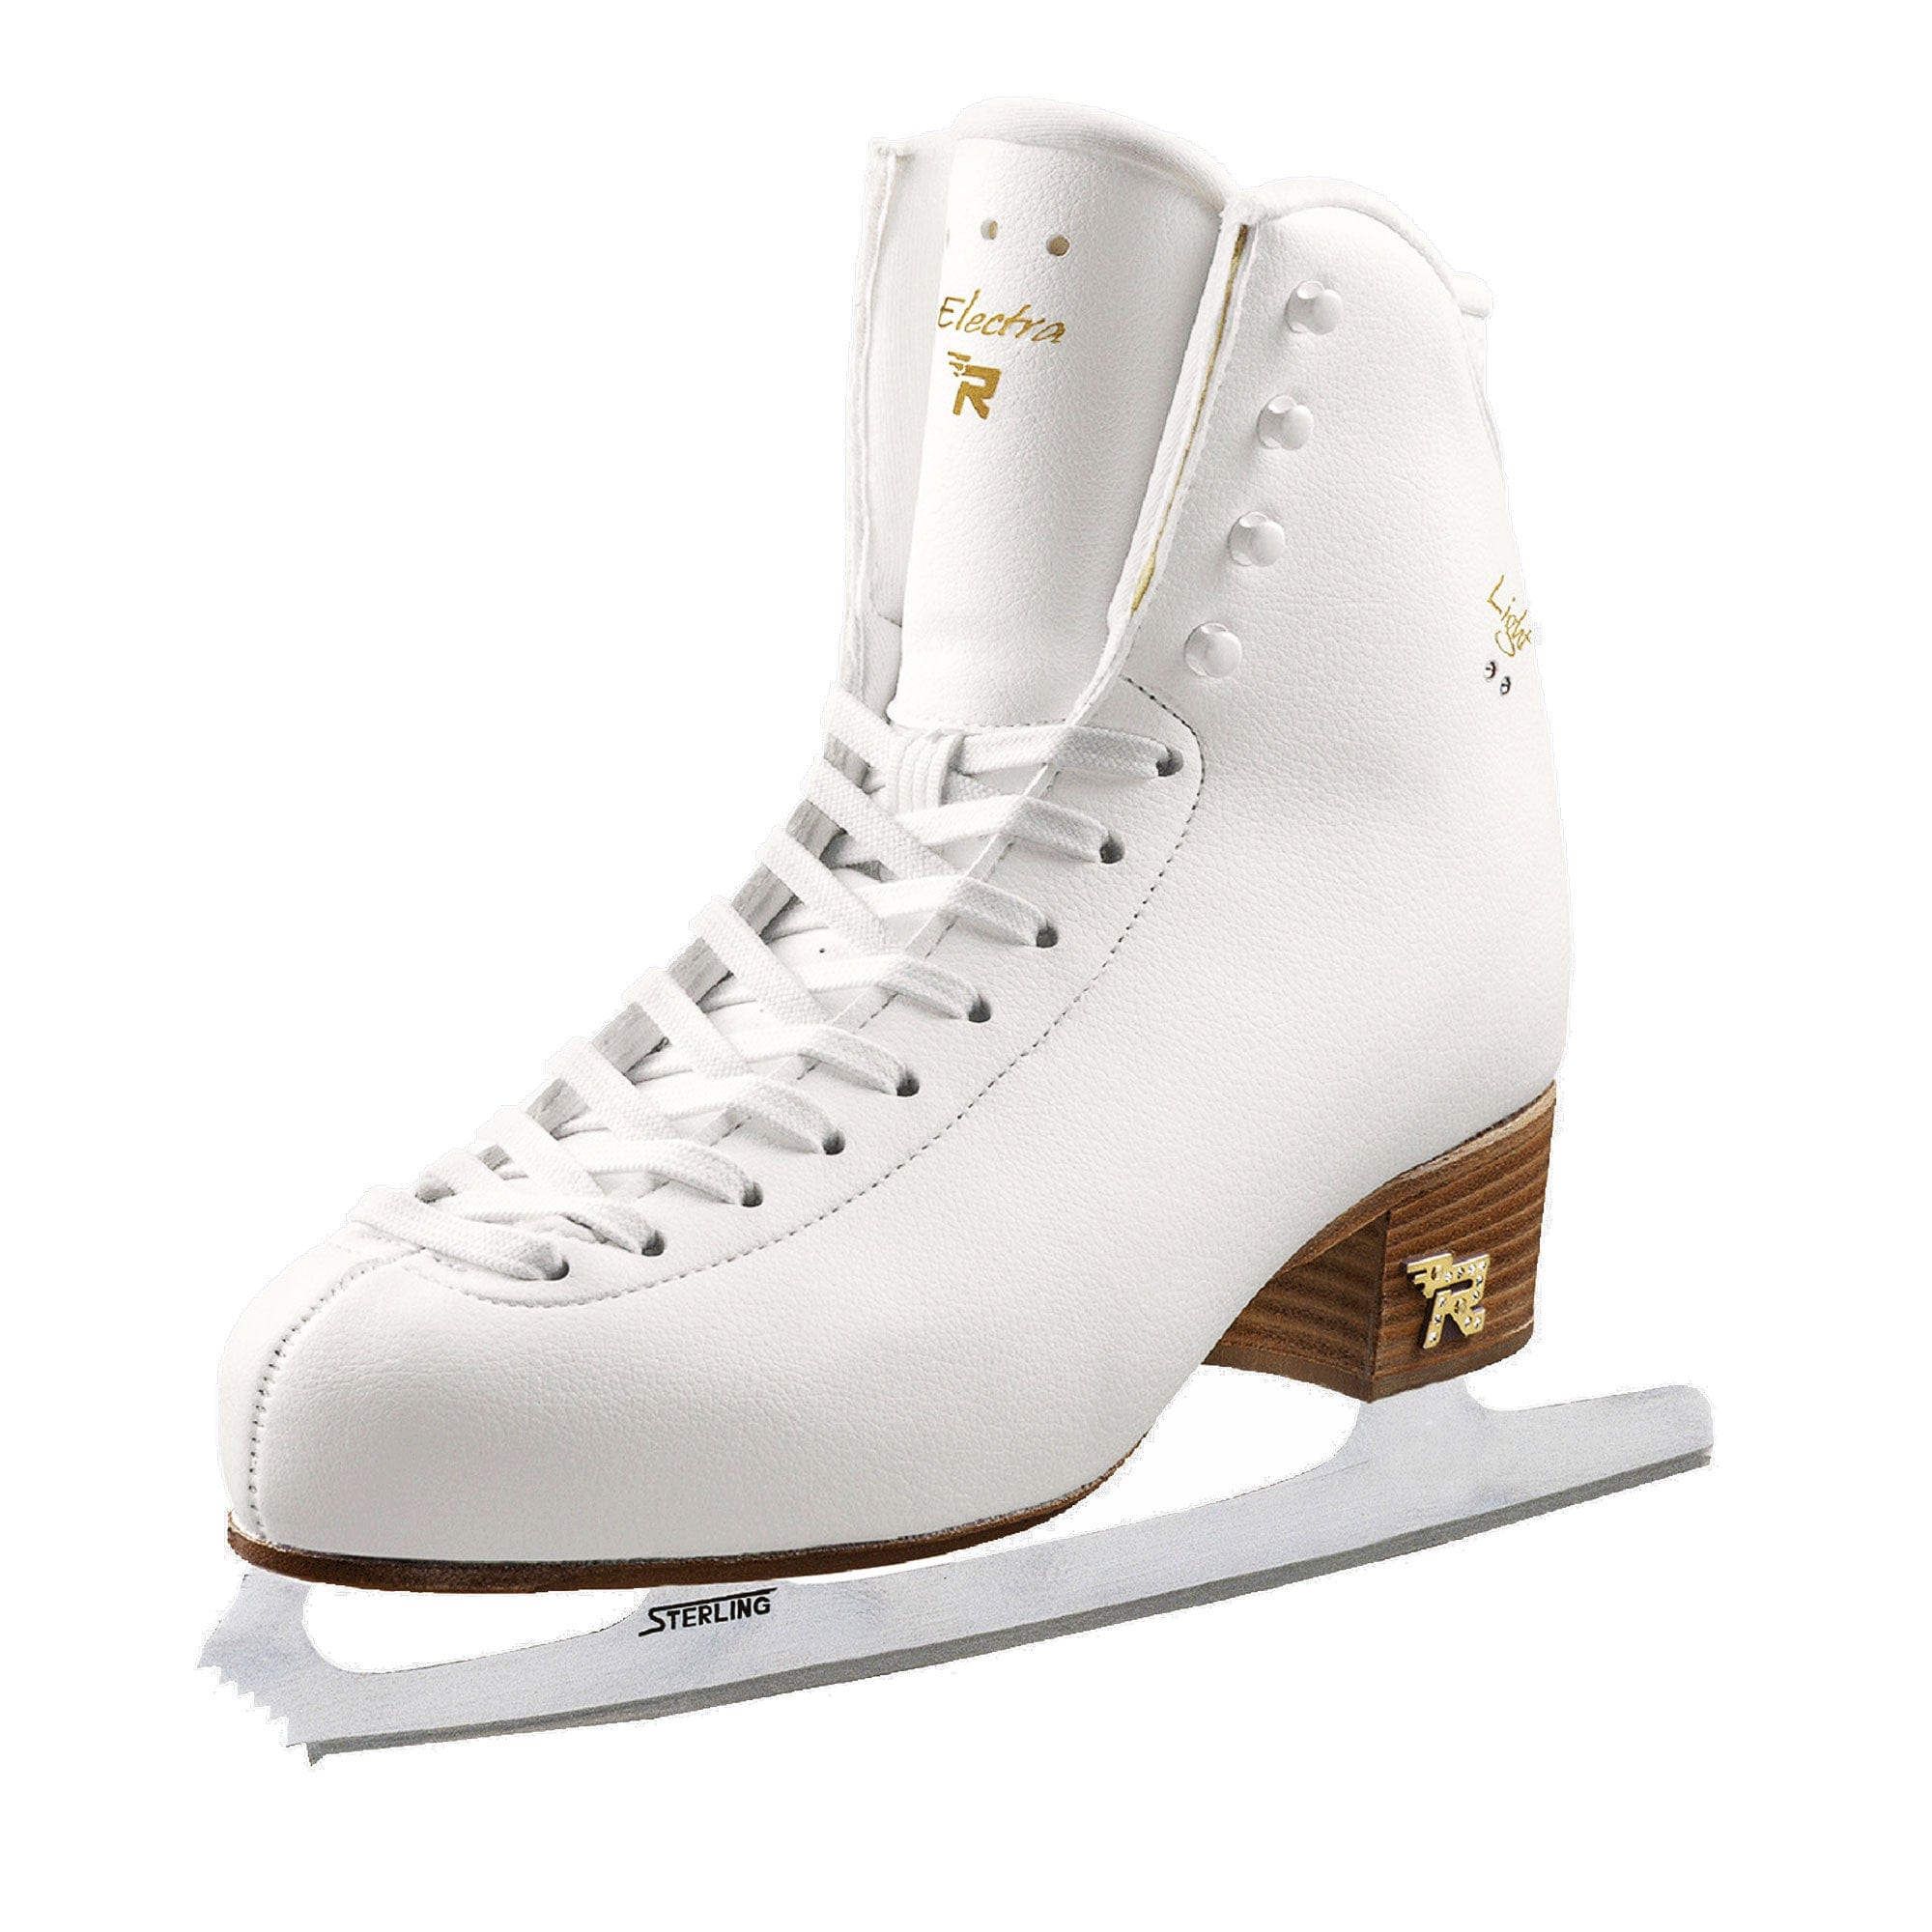 Risport Antares White Ice Skates for Girls - Shop in Can $